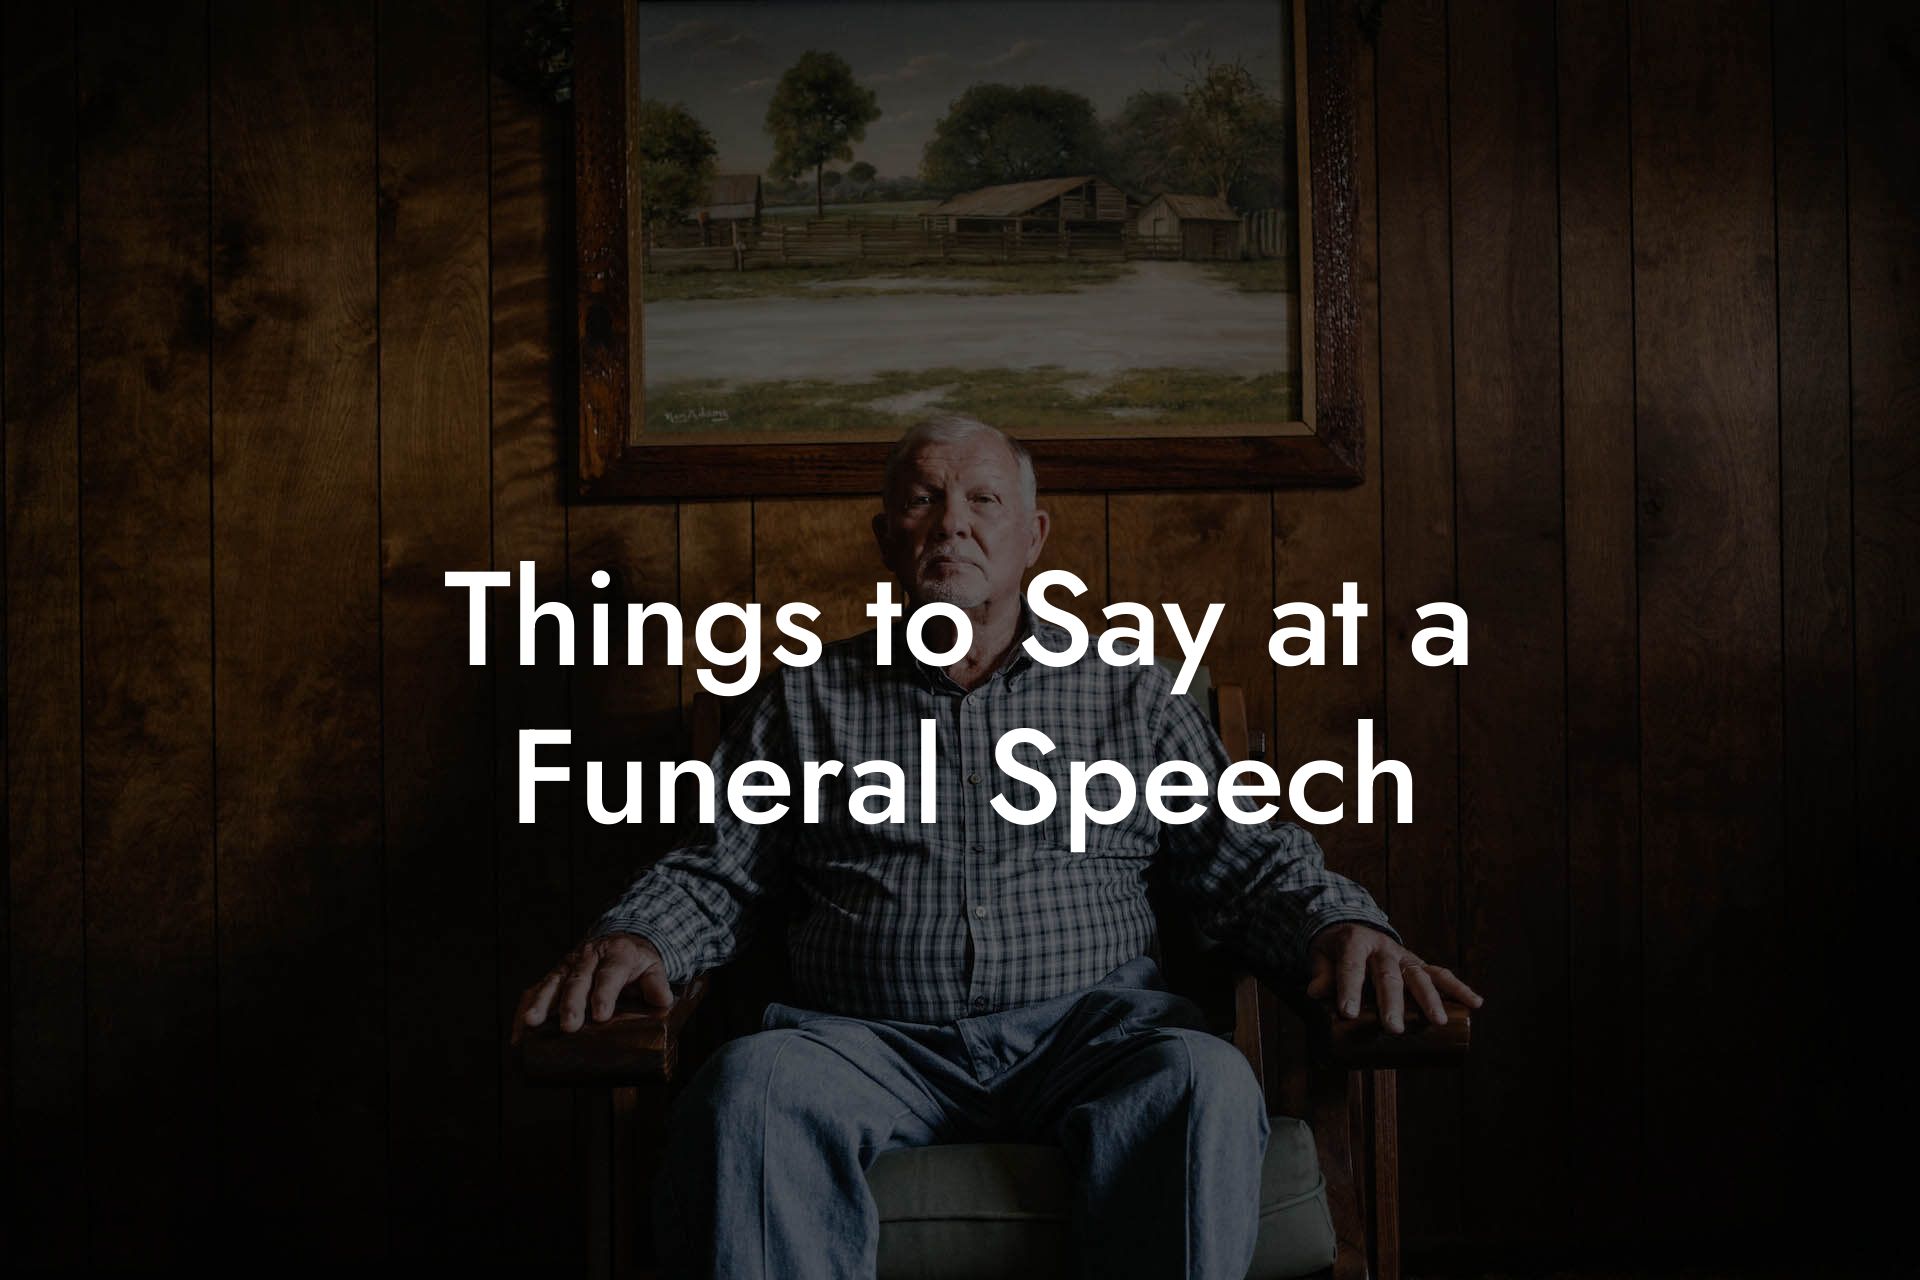 Things to Say at a Funeral Speech